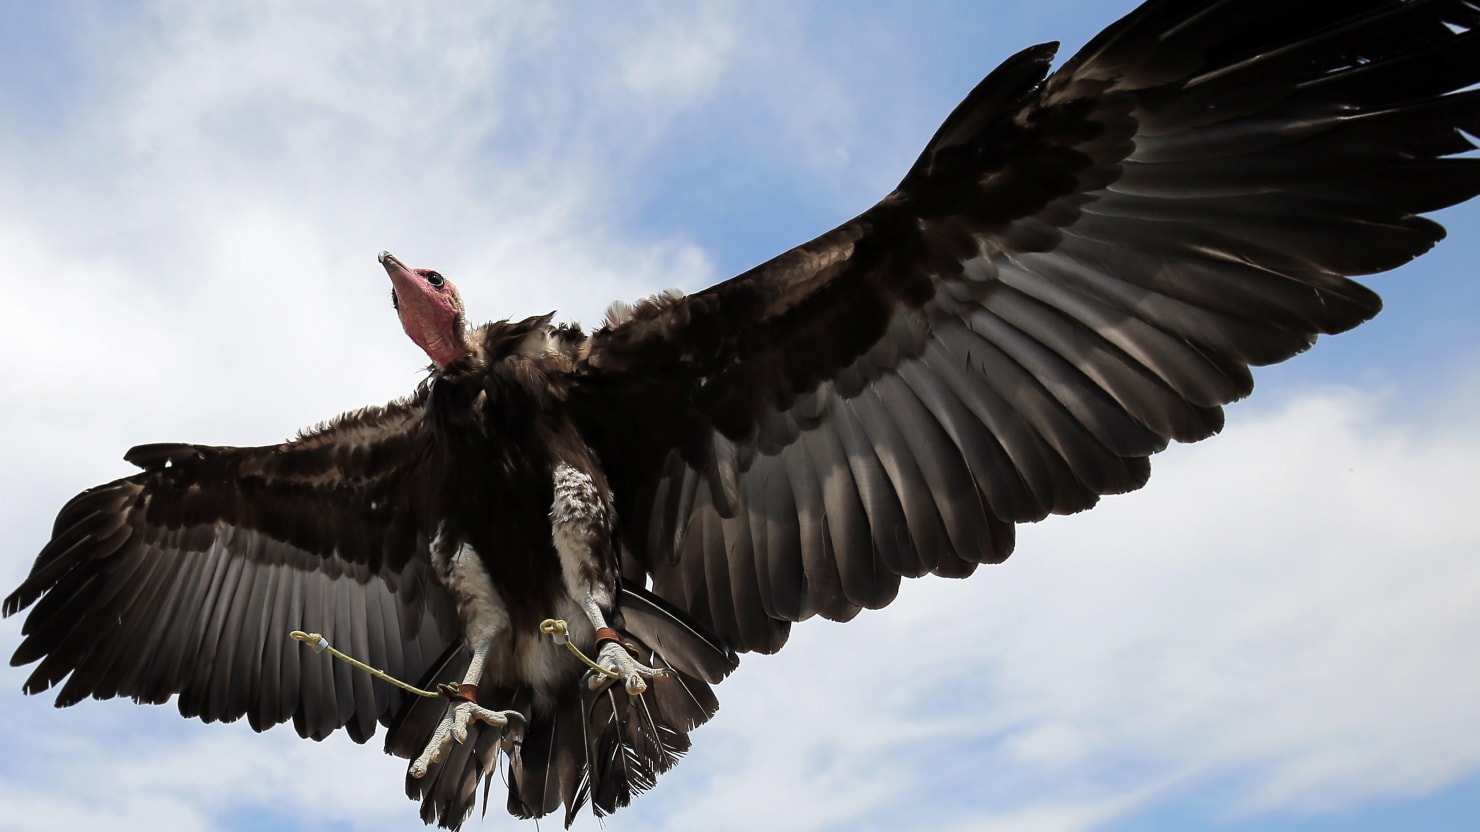 North Carolina Town Besieged By Vultures Turns to Cannon for Defense